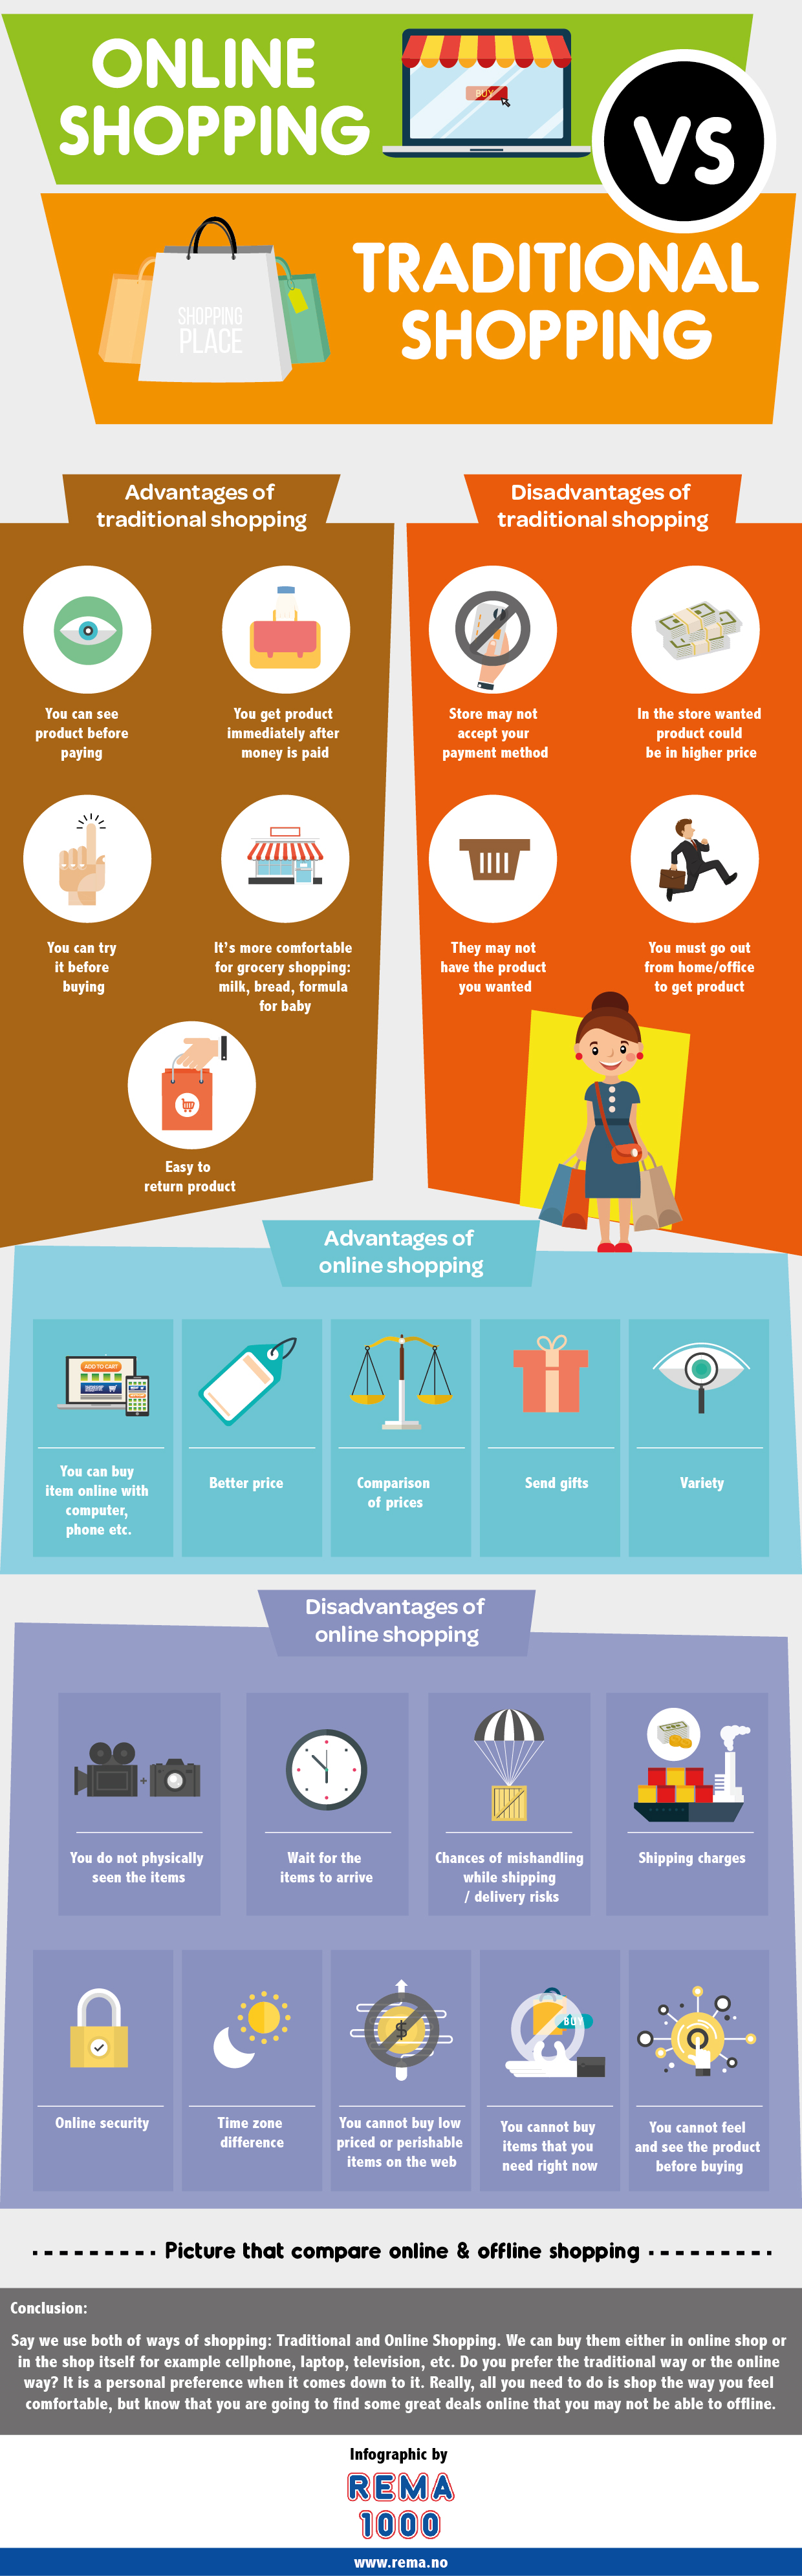 essay on online shopping vs traditional shopping